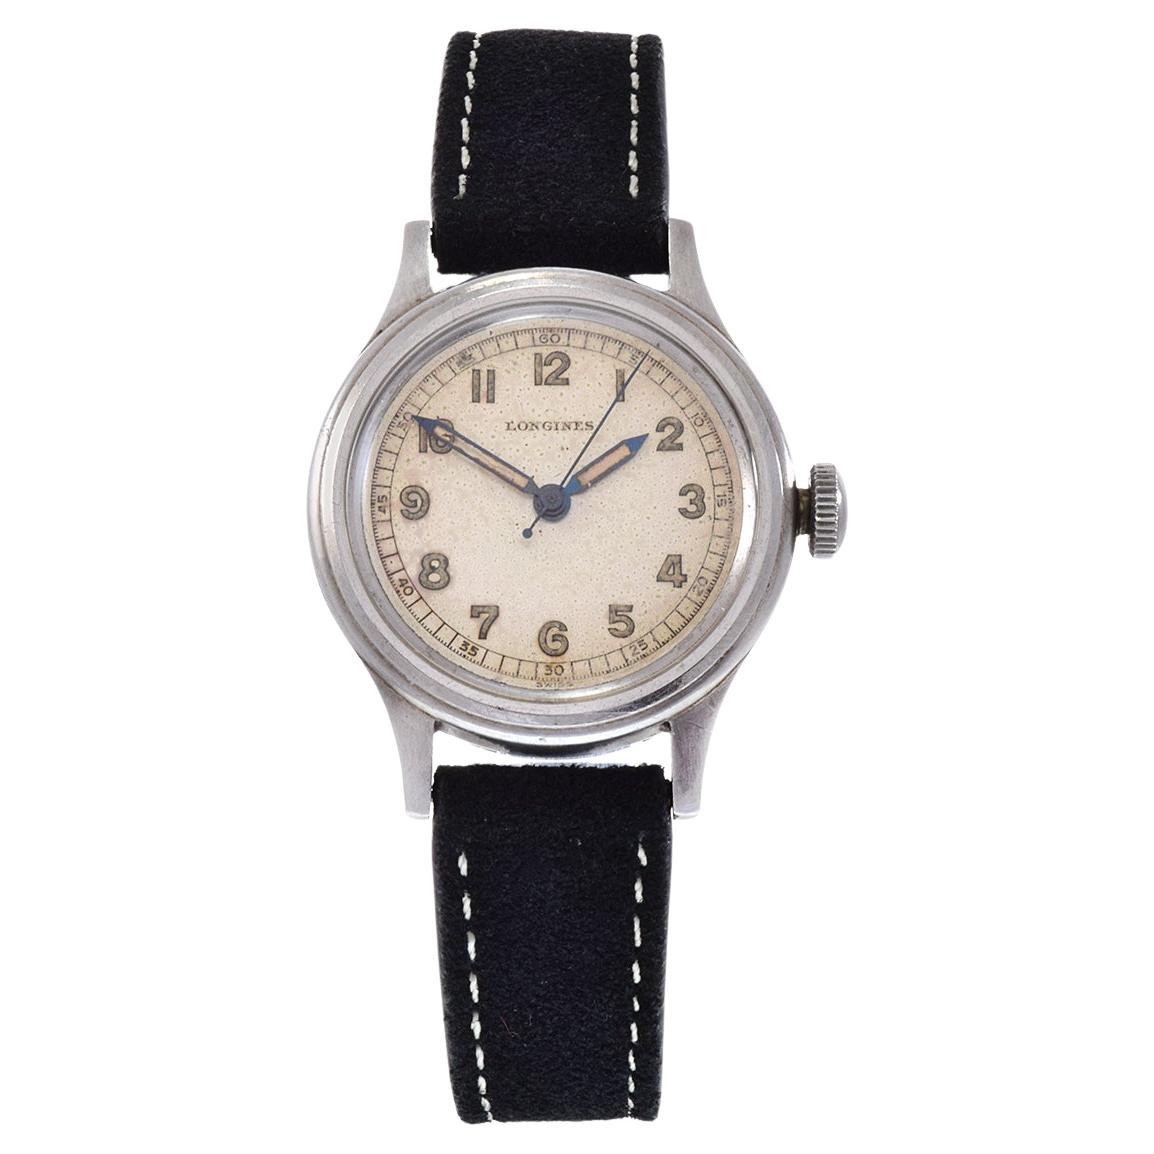 Vintage 1940's Longines Sei Tacche Military Style Watch For Sale